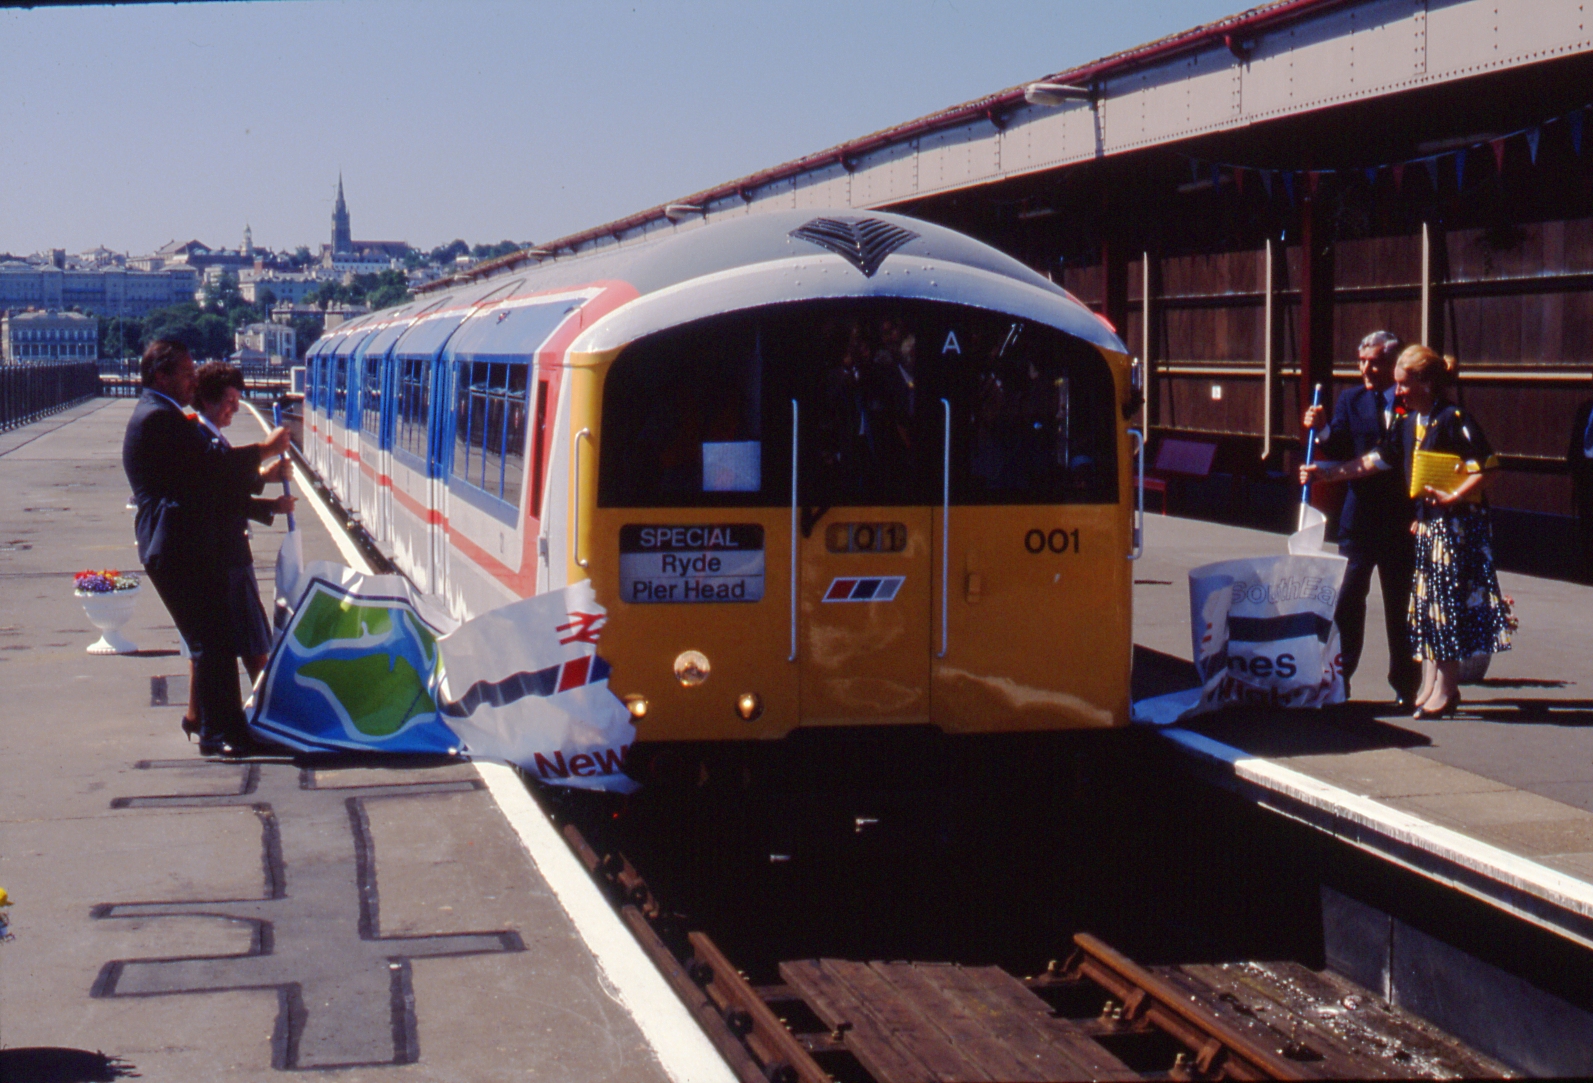 Class 483 train arriving in 1989 at Ryde Pier Head, Island of Wight